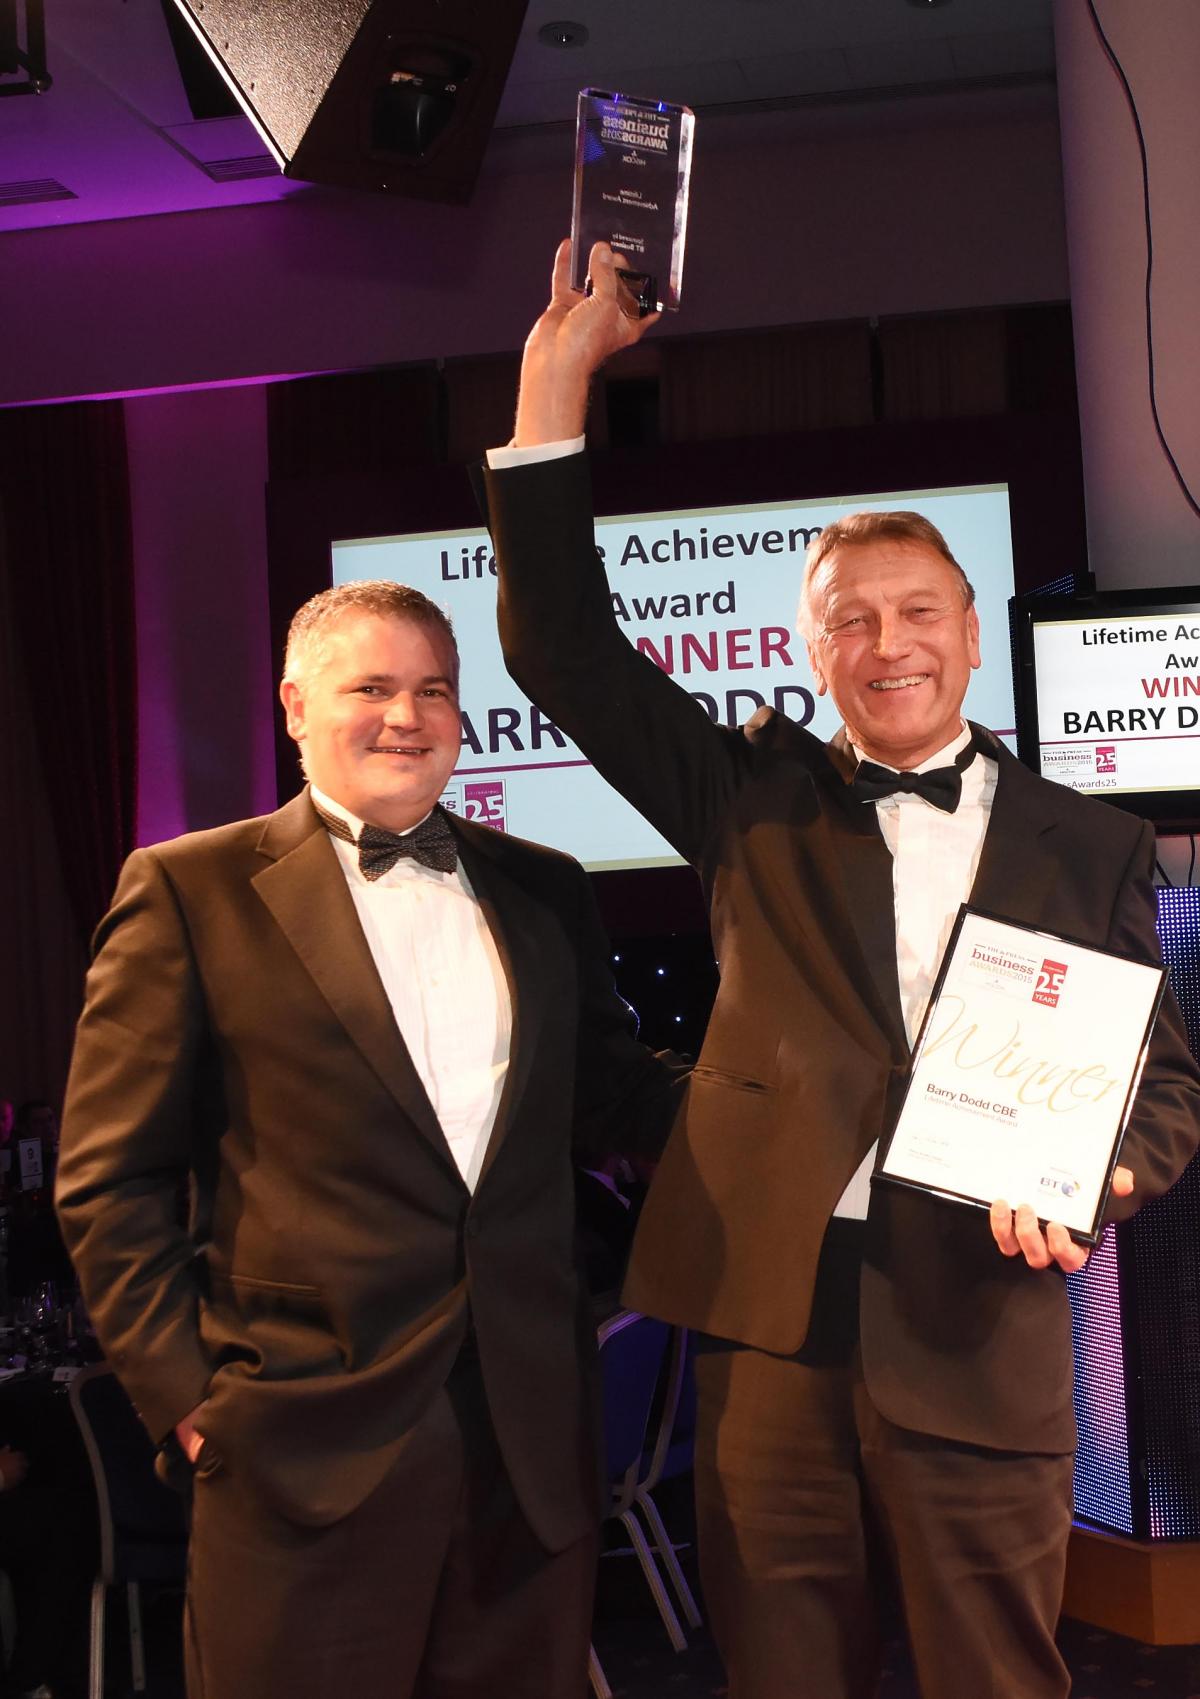 The Press Business Awards 2015. Lifetime Achievement Award Winner Barry Dodd CBE, right, with his award and Danny Longbottom, left, of BT Business who presented the award. Picture David Harrison.